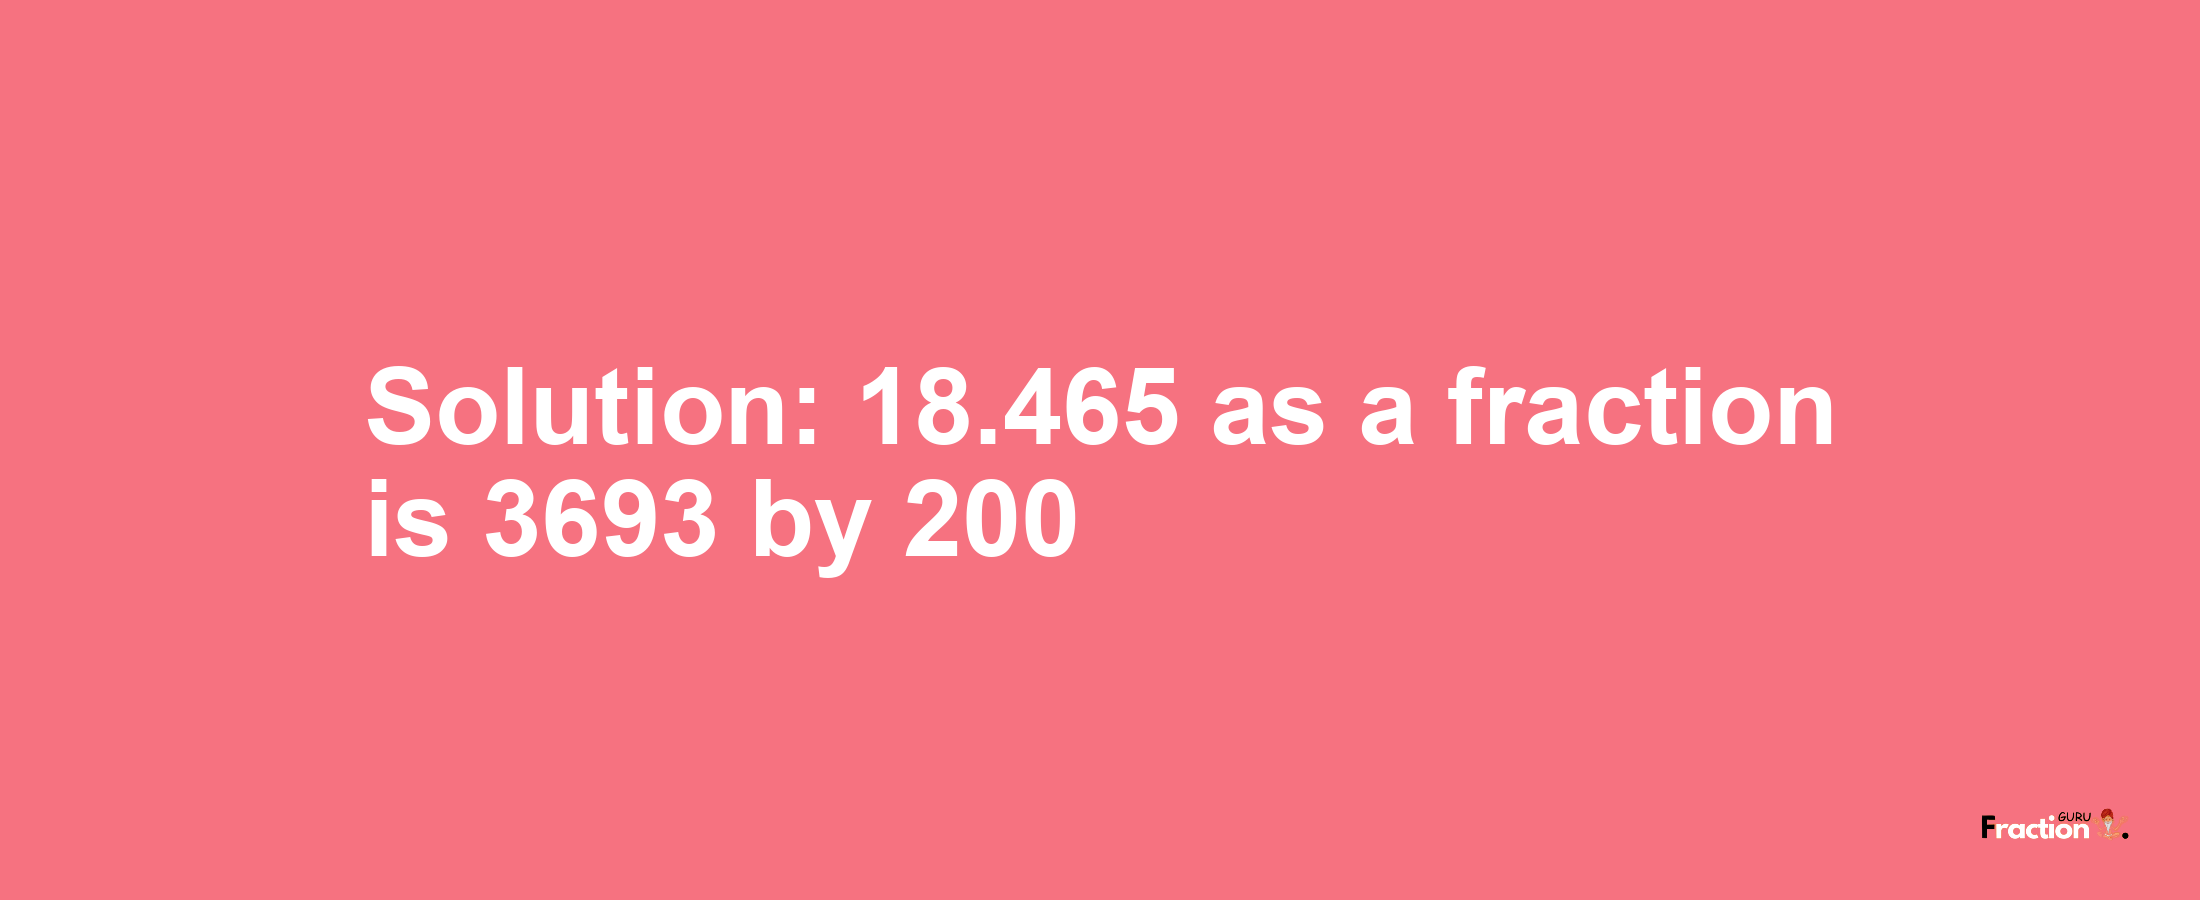 Solution:18.465 as a fraction is 3693/200